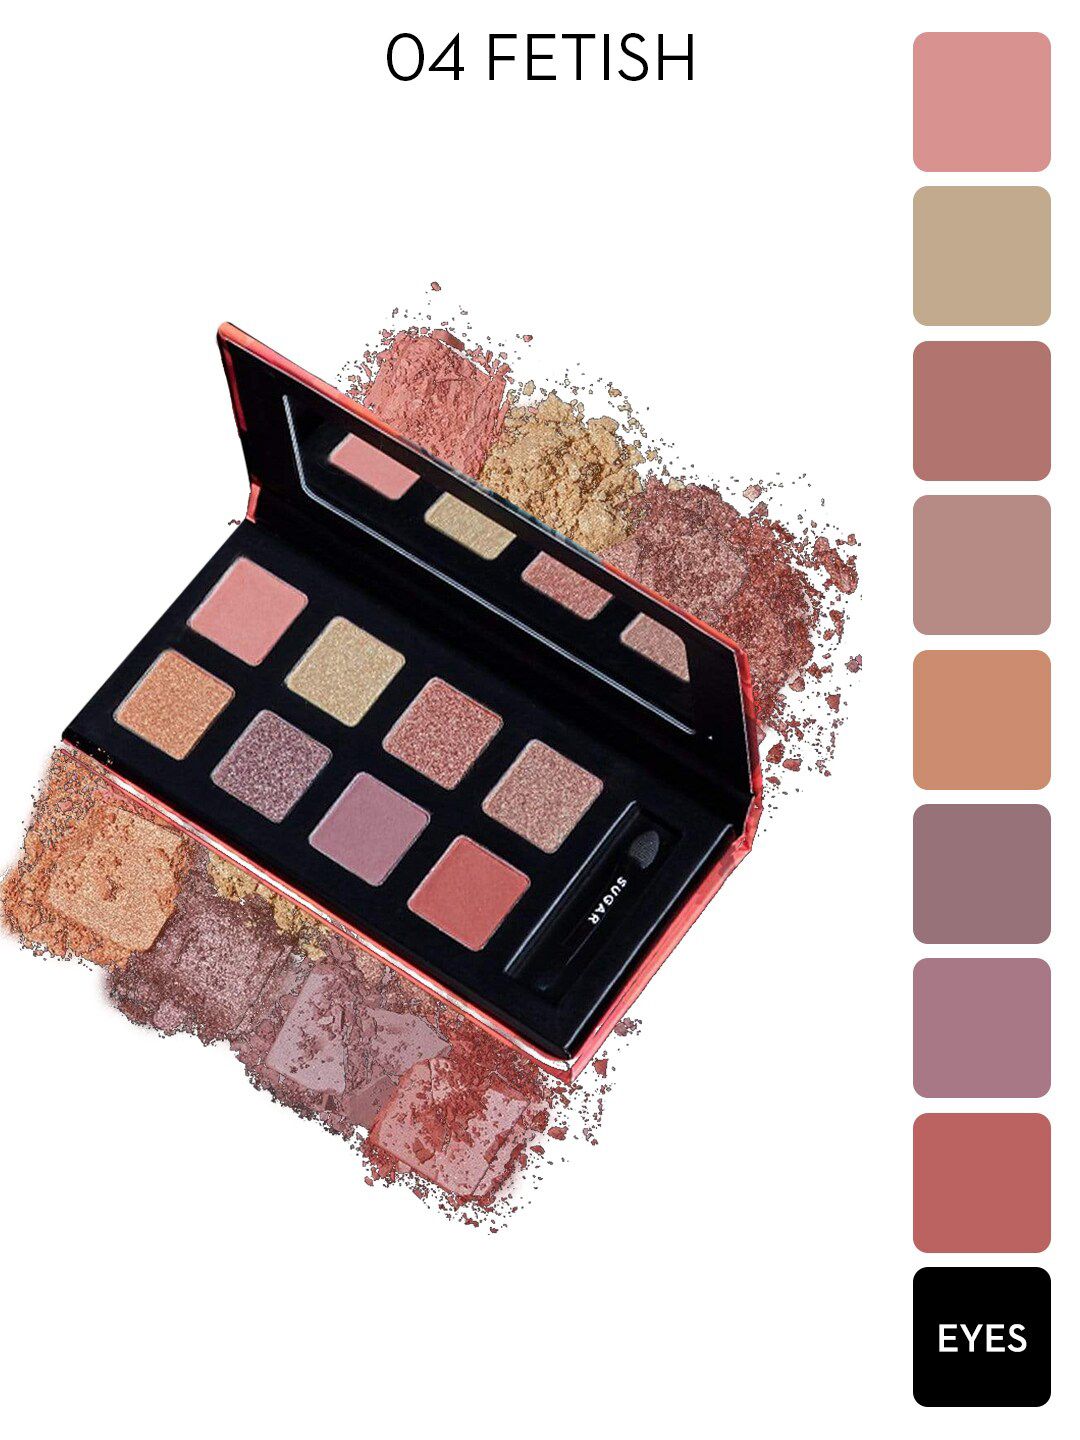 SUGAR Cosmetics Blend The Rules Eyeshadow Palette - 04 Fetish Price in India